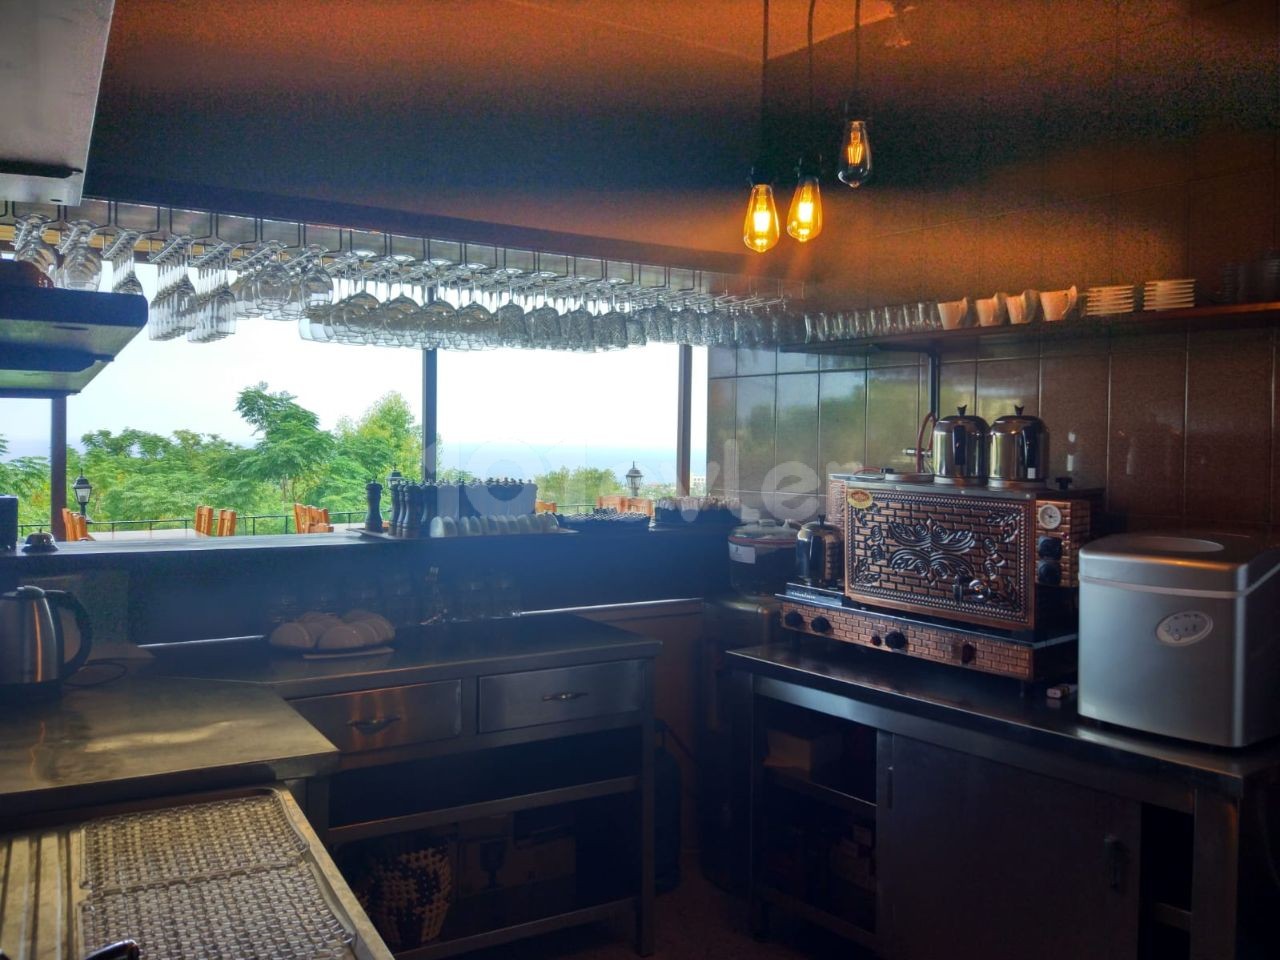 RESTAURANT FOR SALE IN WORKING CONDITION